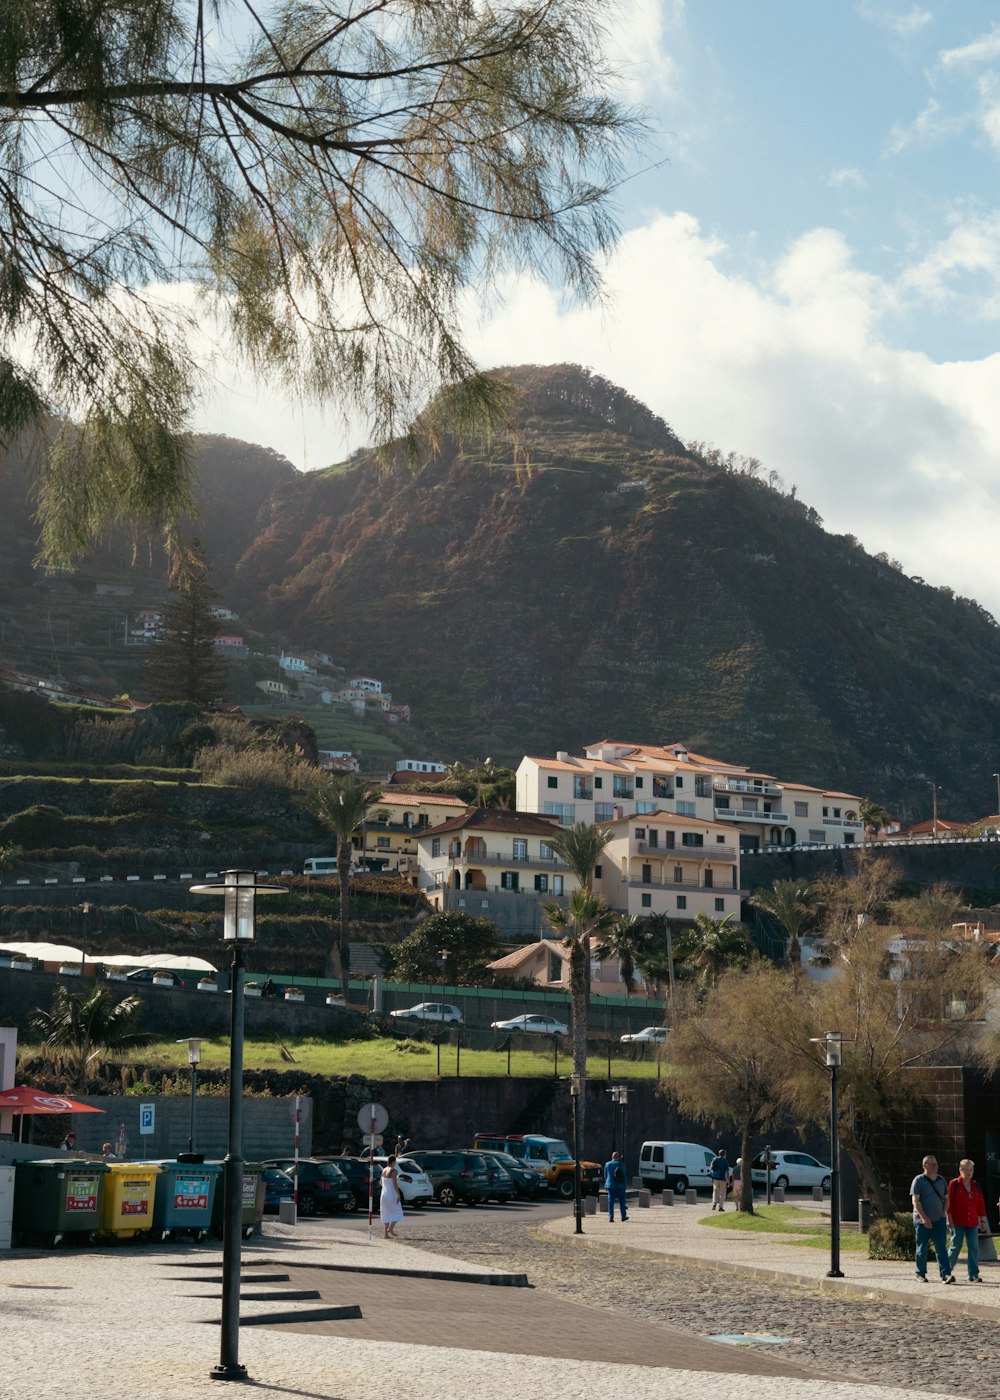 a group of people walking down a street next to a mountain